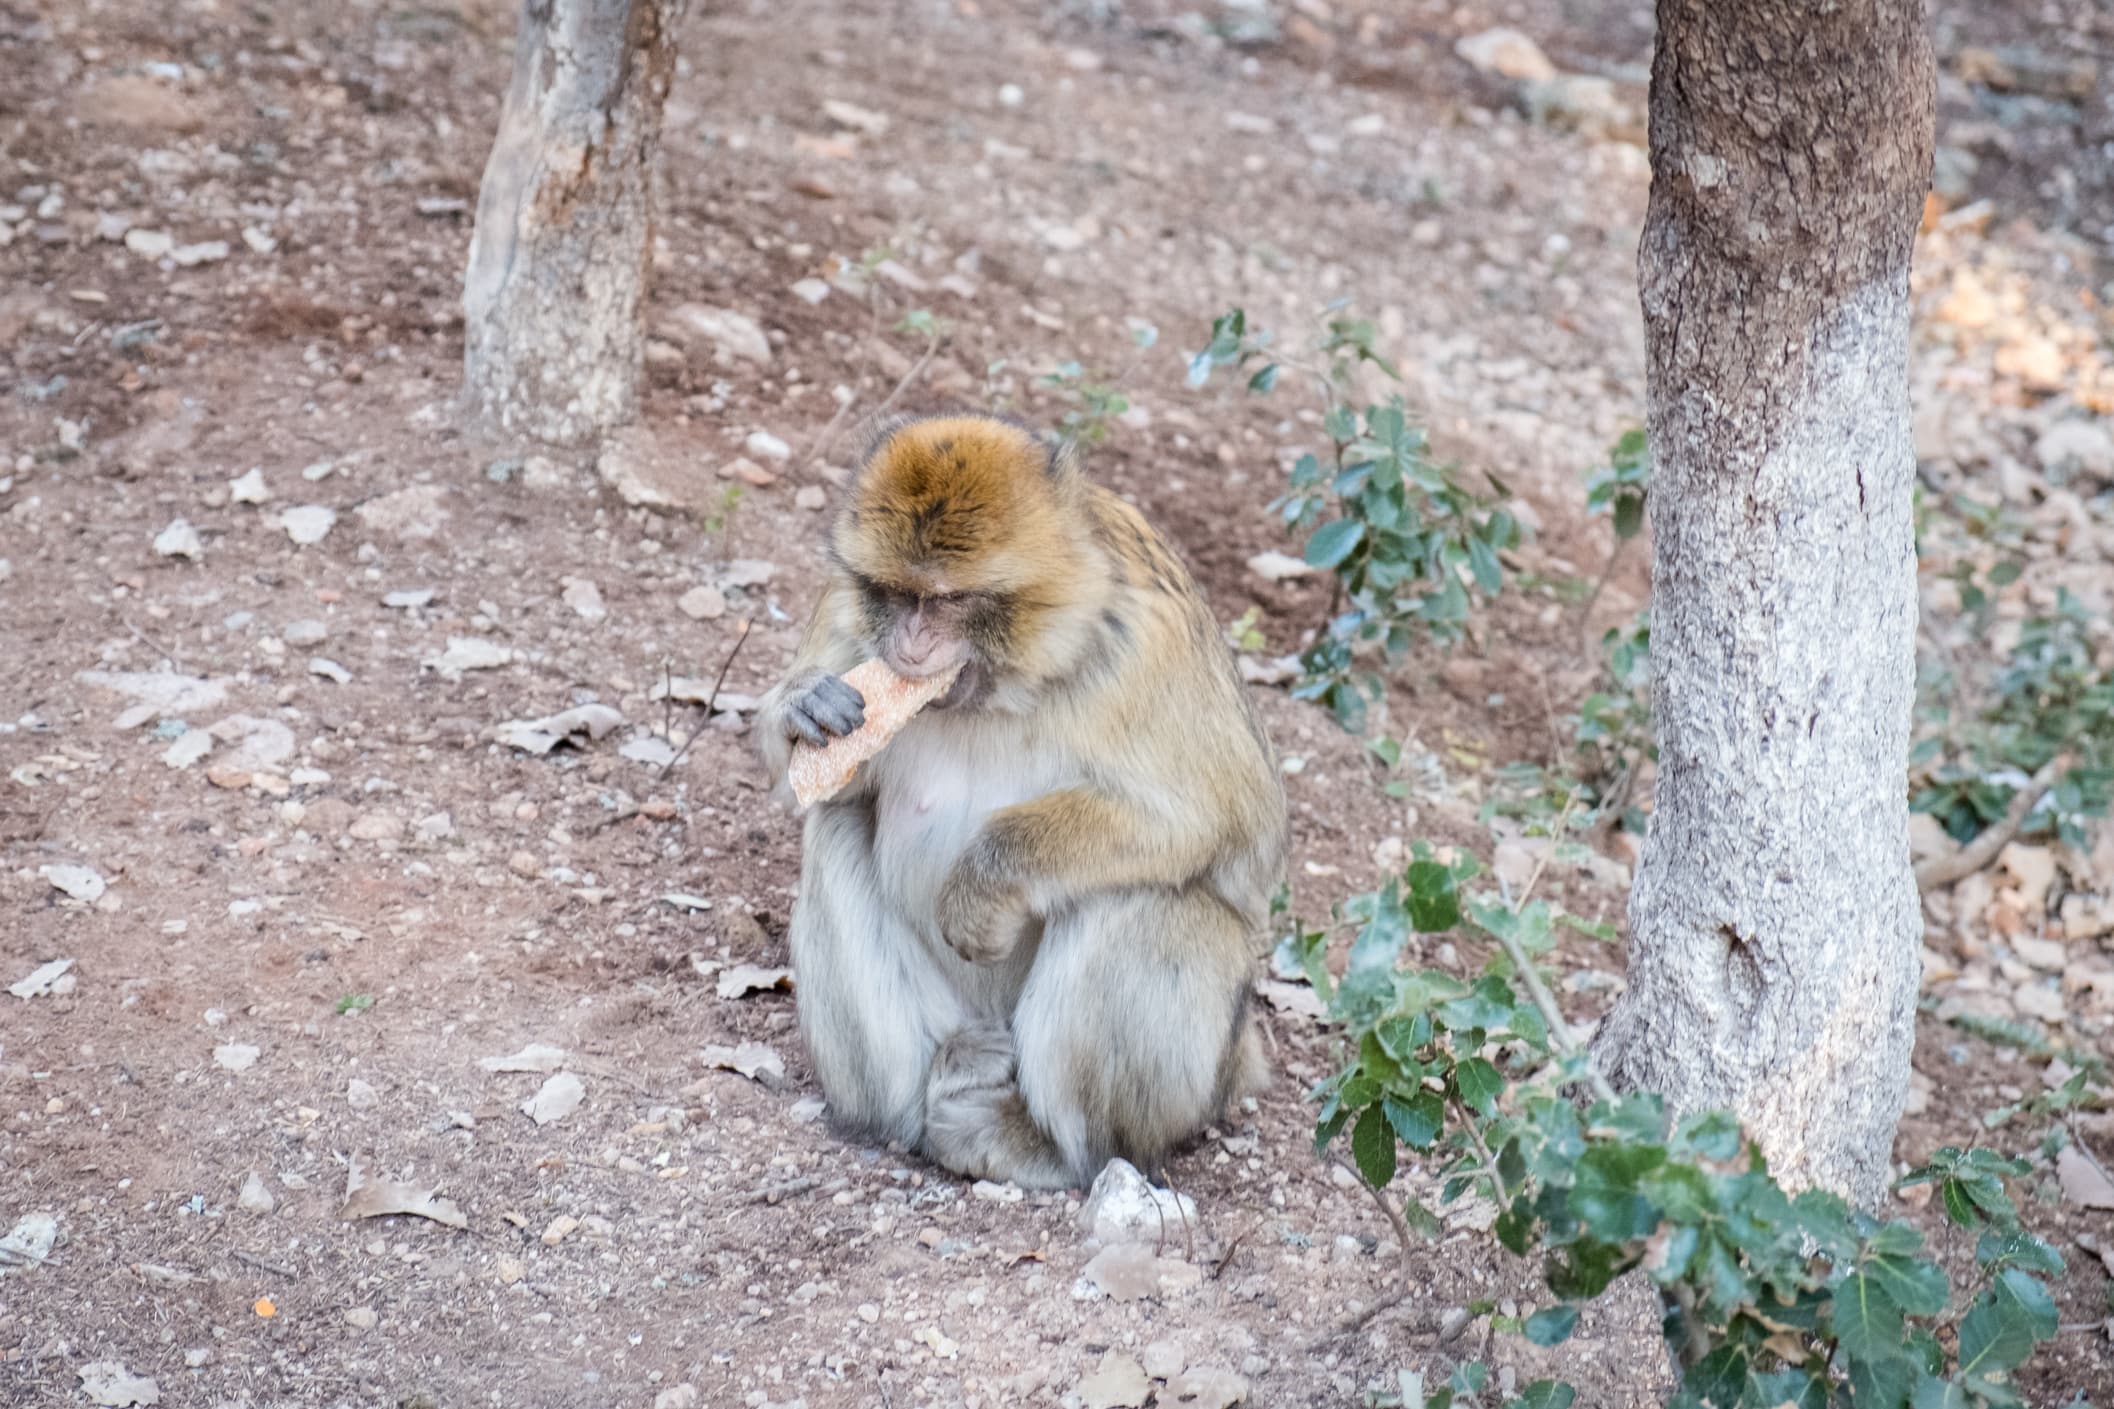 Monkey eating food from a tourist in Ifrane, Morocco